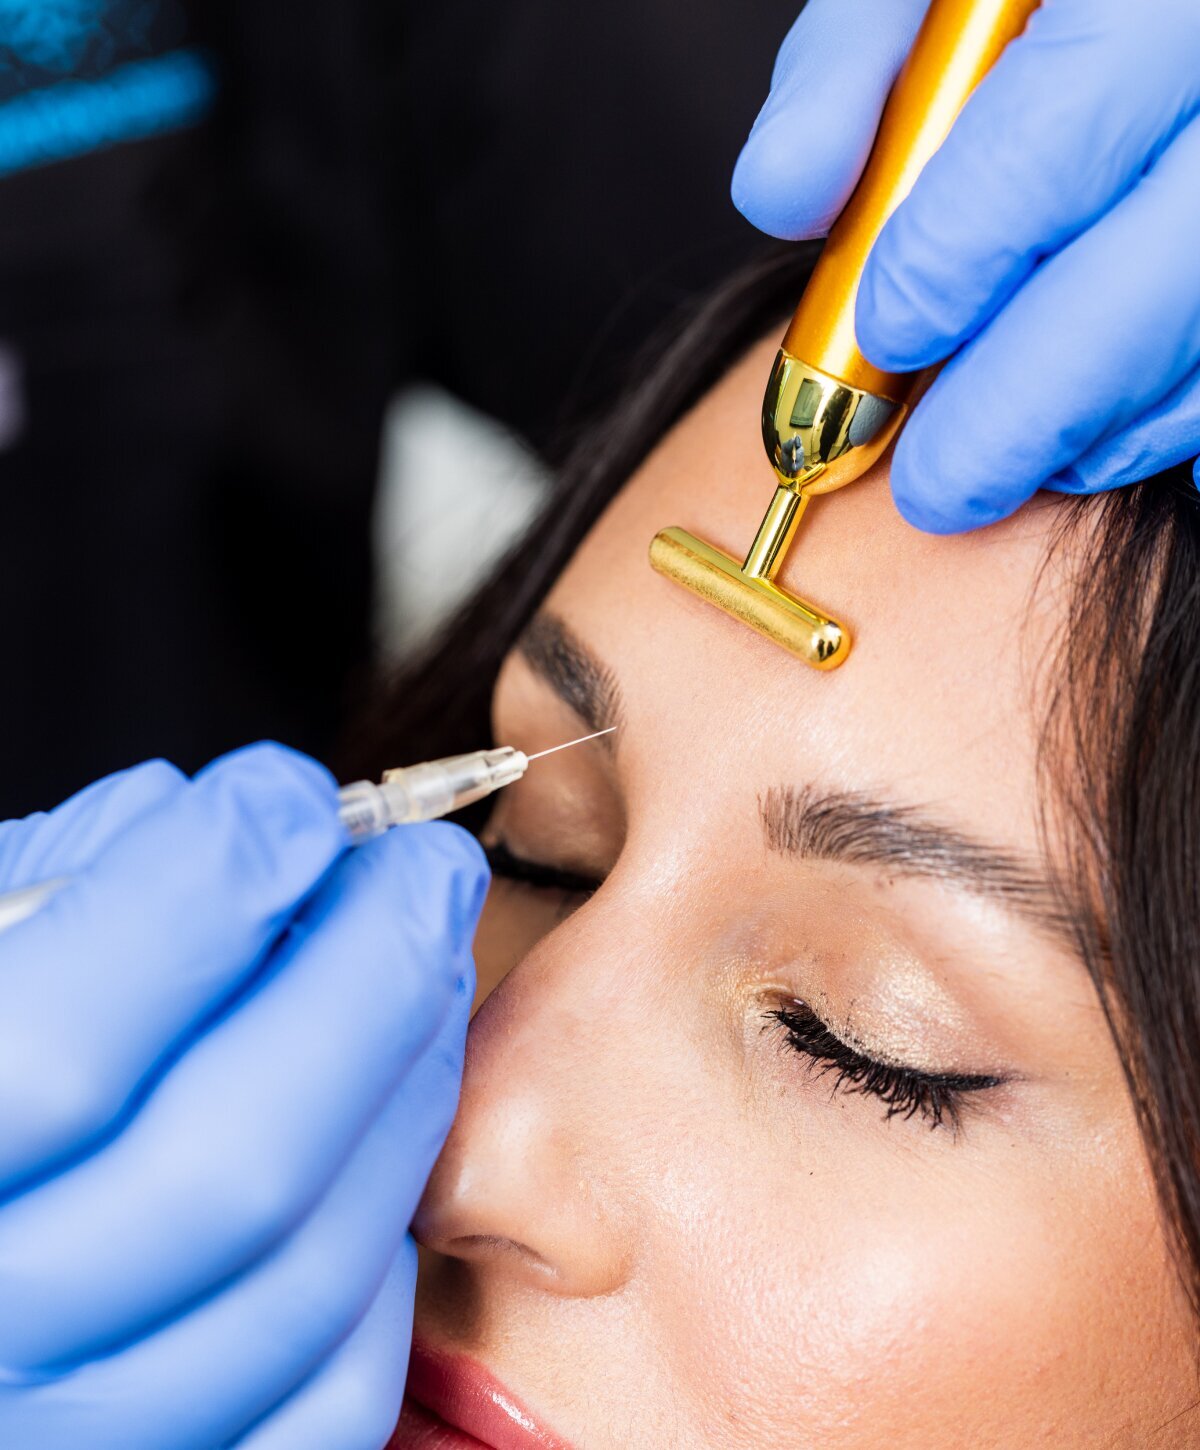 Boca Raton Injectables model being treated